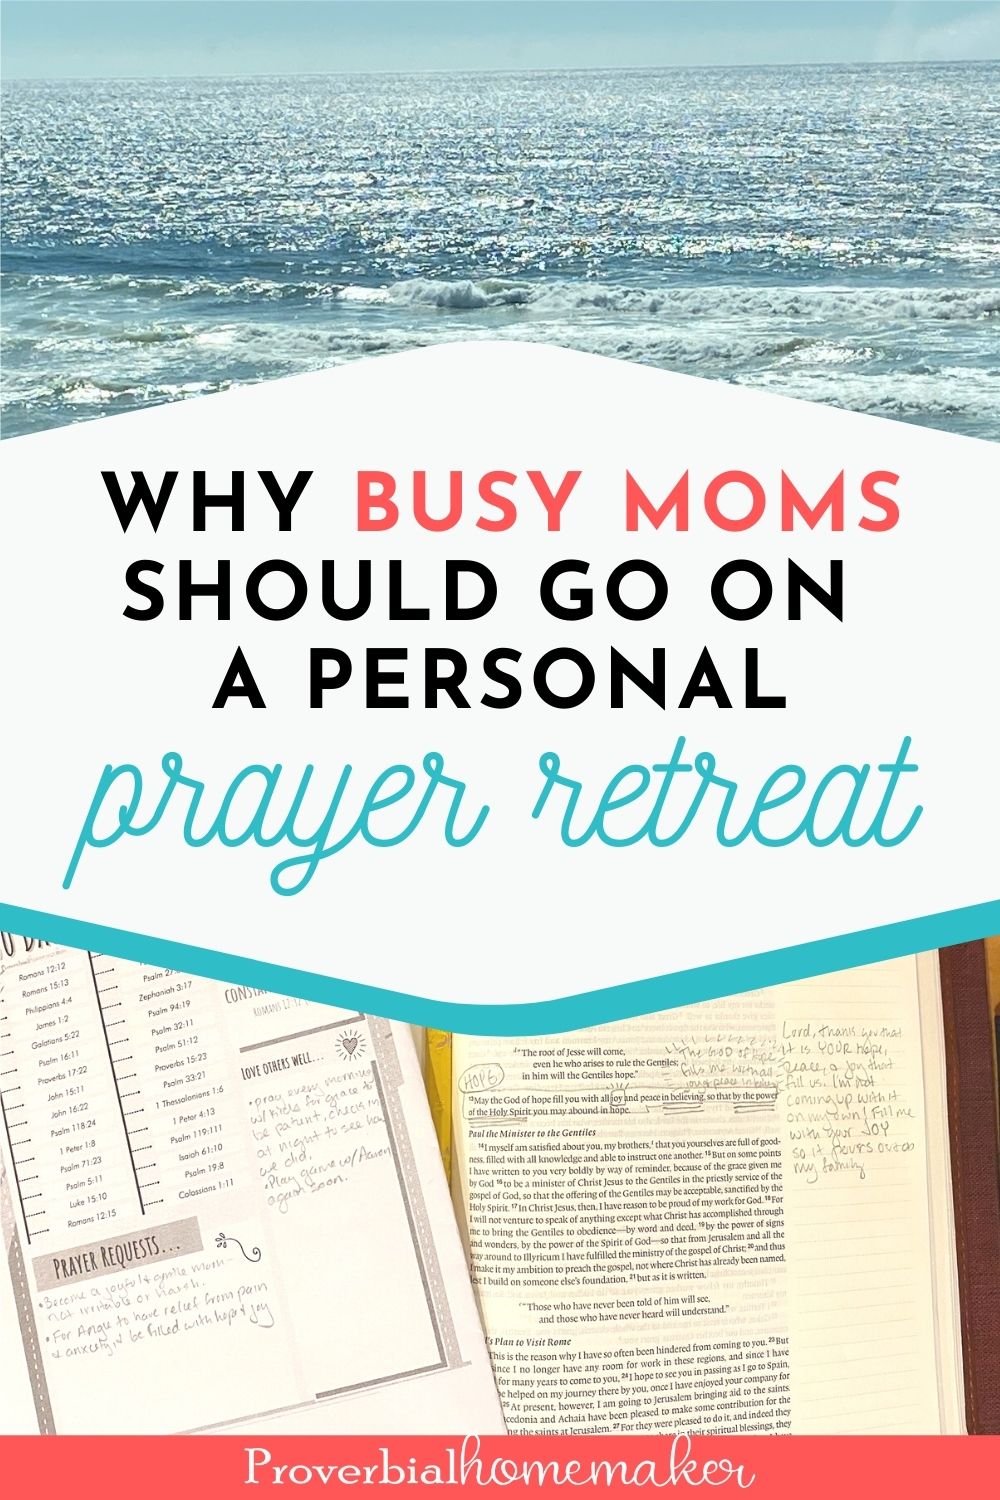 Are you a busy mom? Here's why taking personal prayer retreats can be such a blessing to you and your family, with tips on how to make it happen!